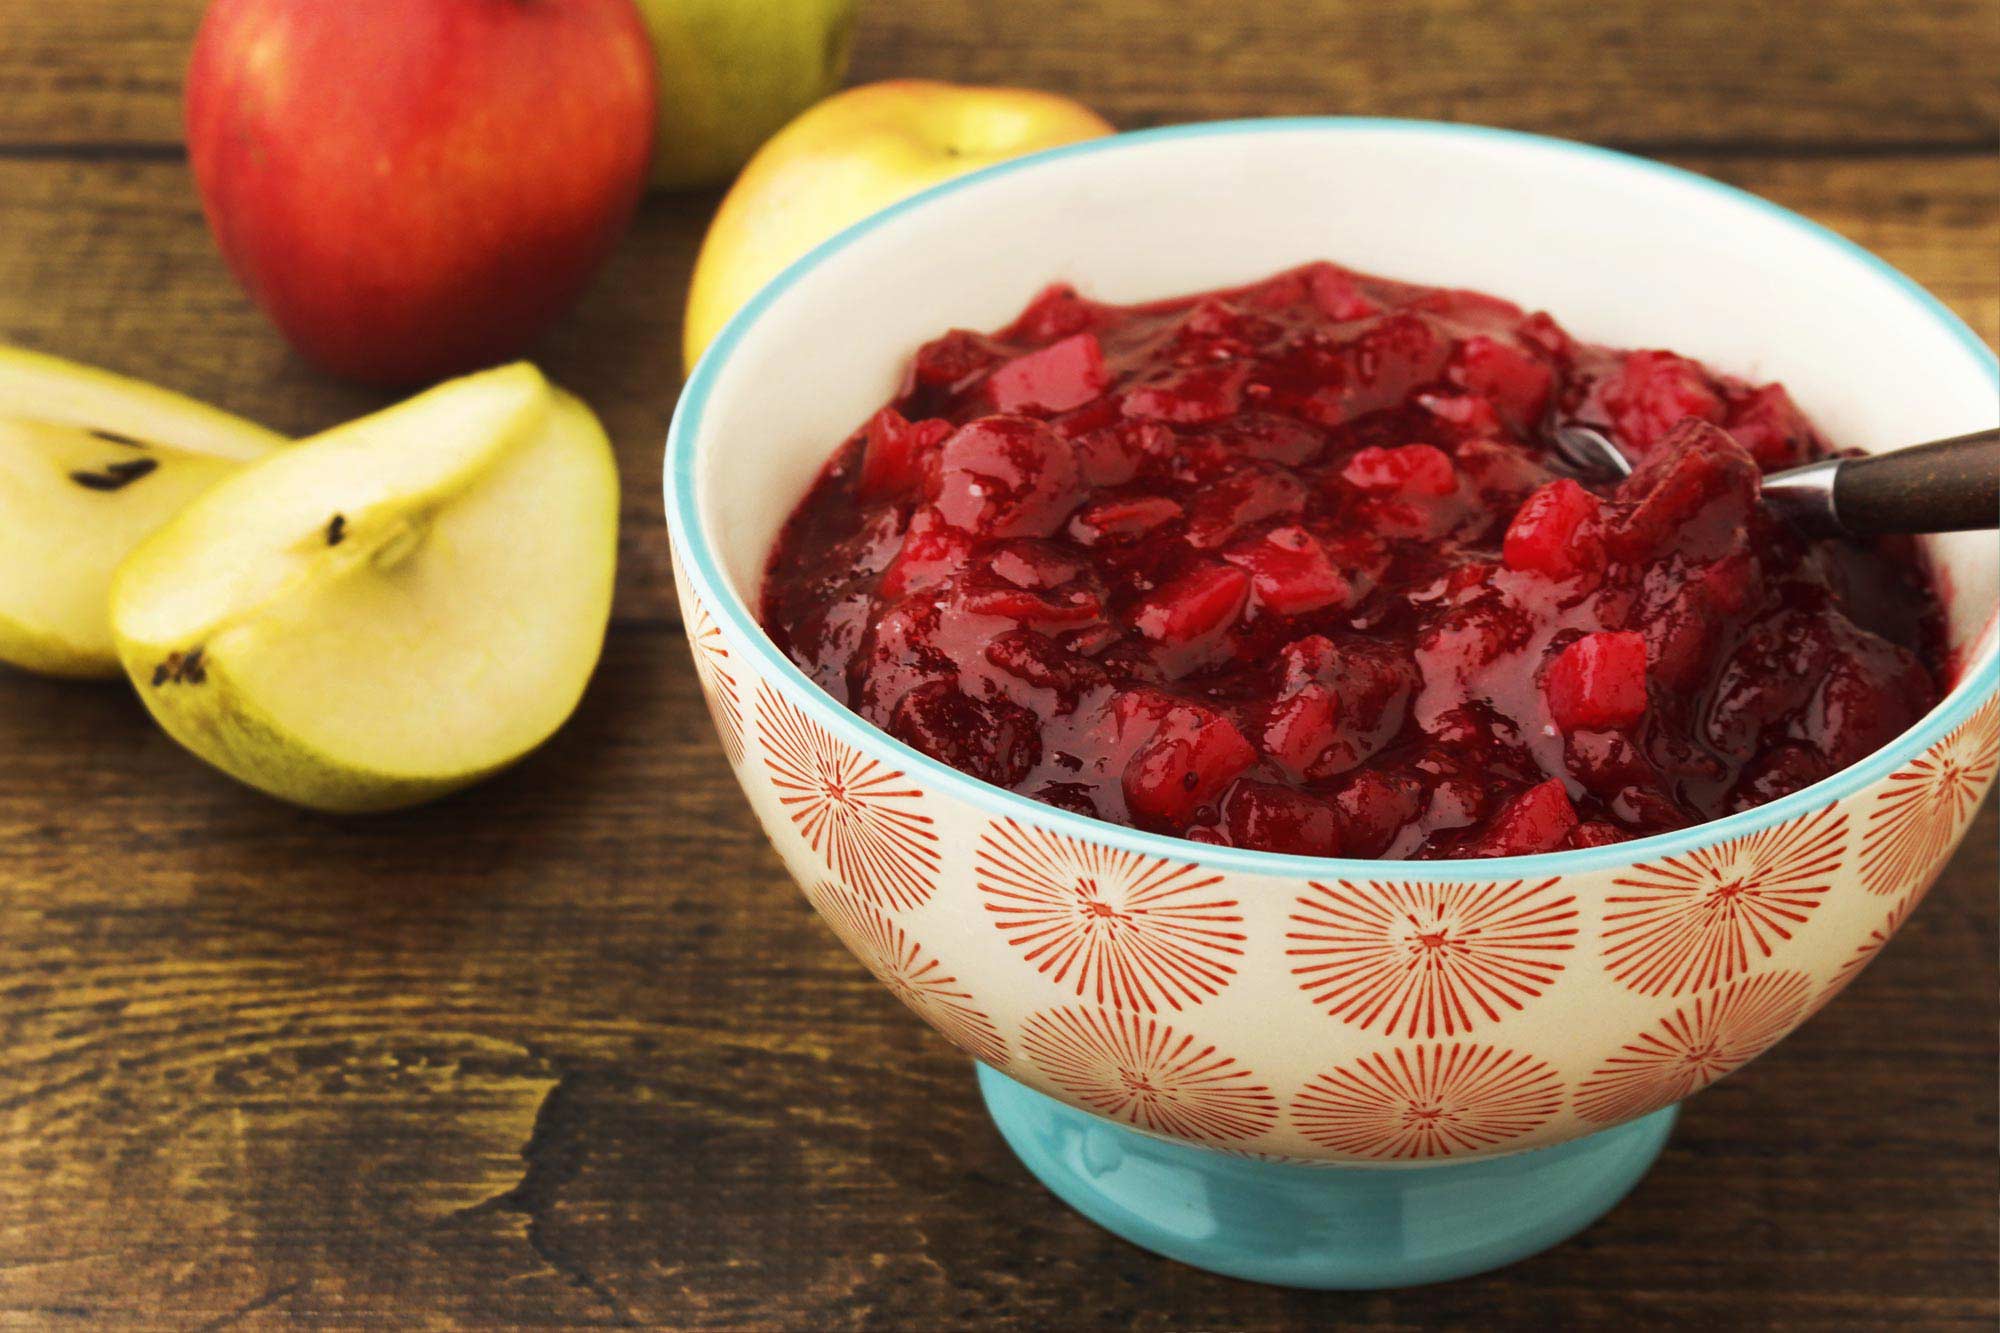 Farm Fresh To You - Recipe: Apple, Pear and Cranberry Compote